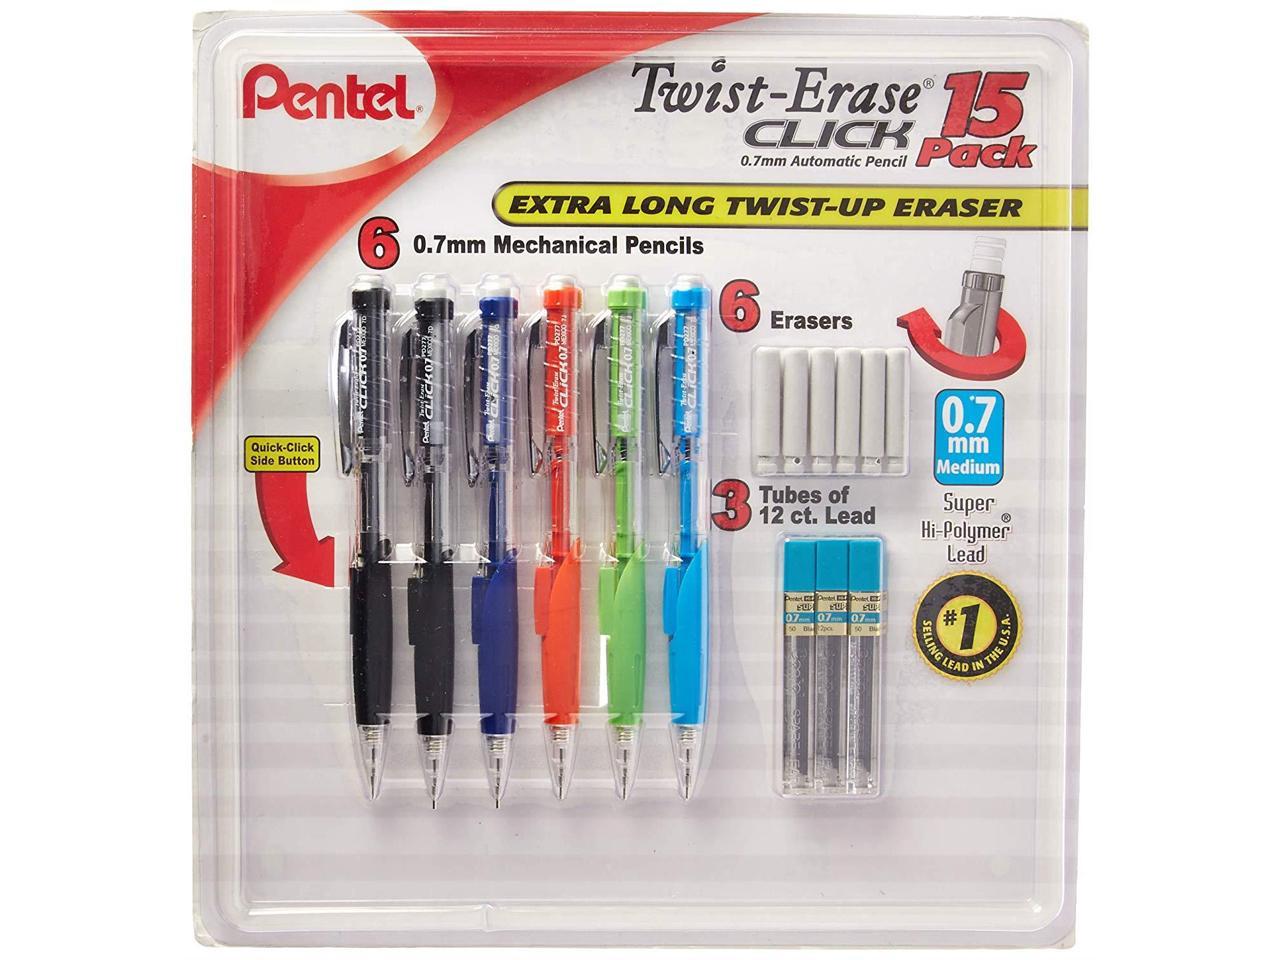 Pentel Twist Erase Click Automatic Pencil With 2 Eraser Refills and Lead 0.9 M for sale online 